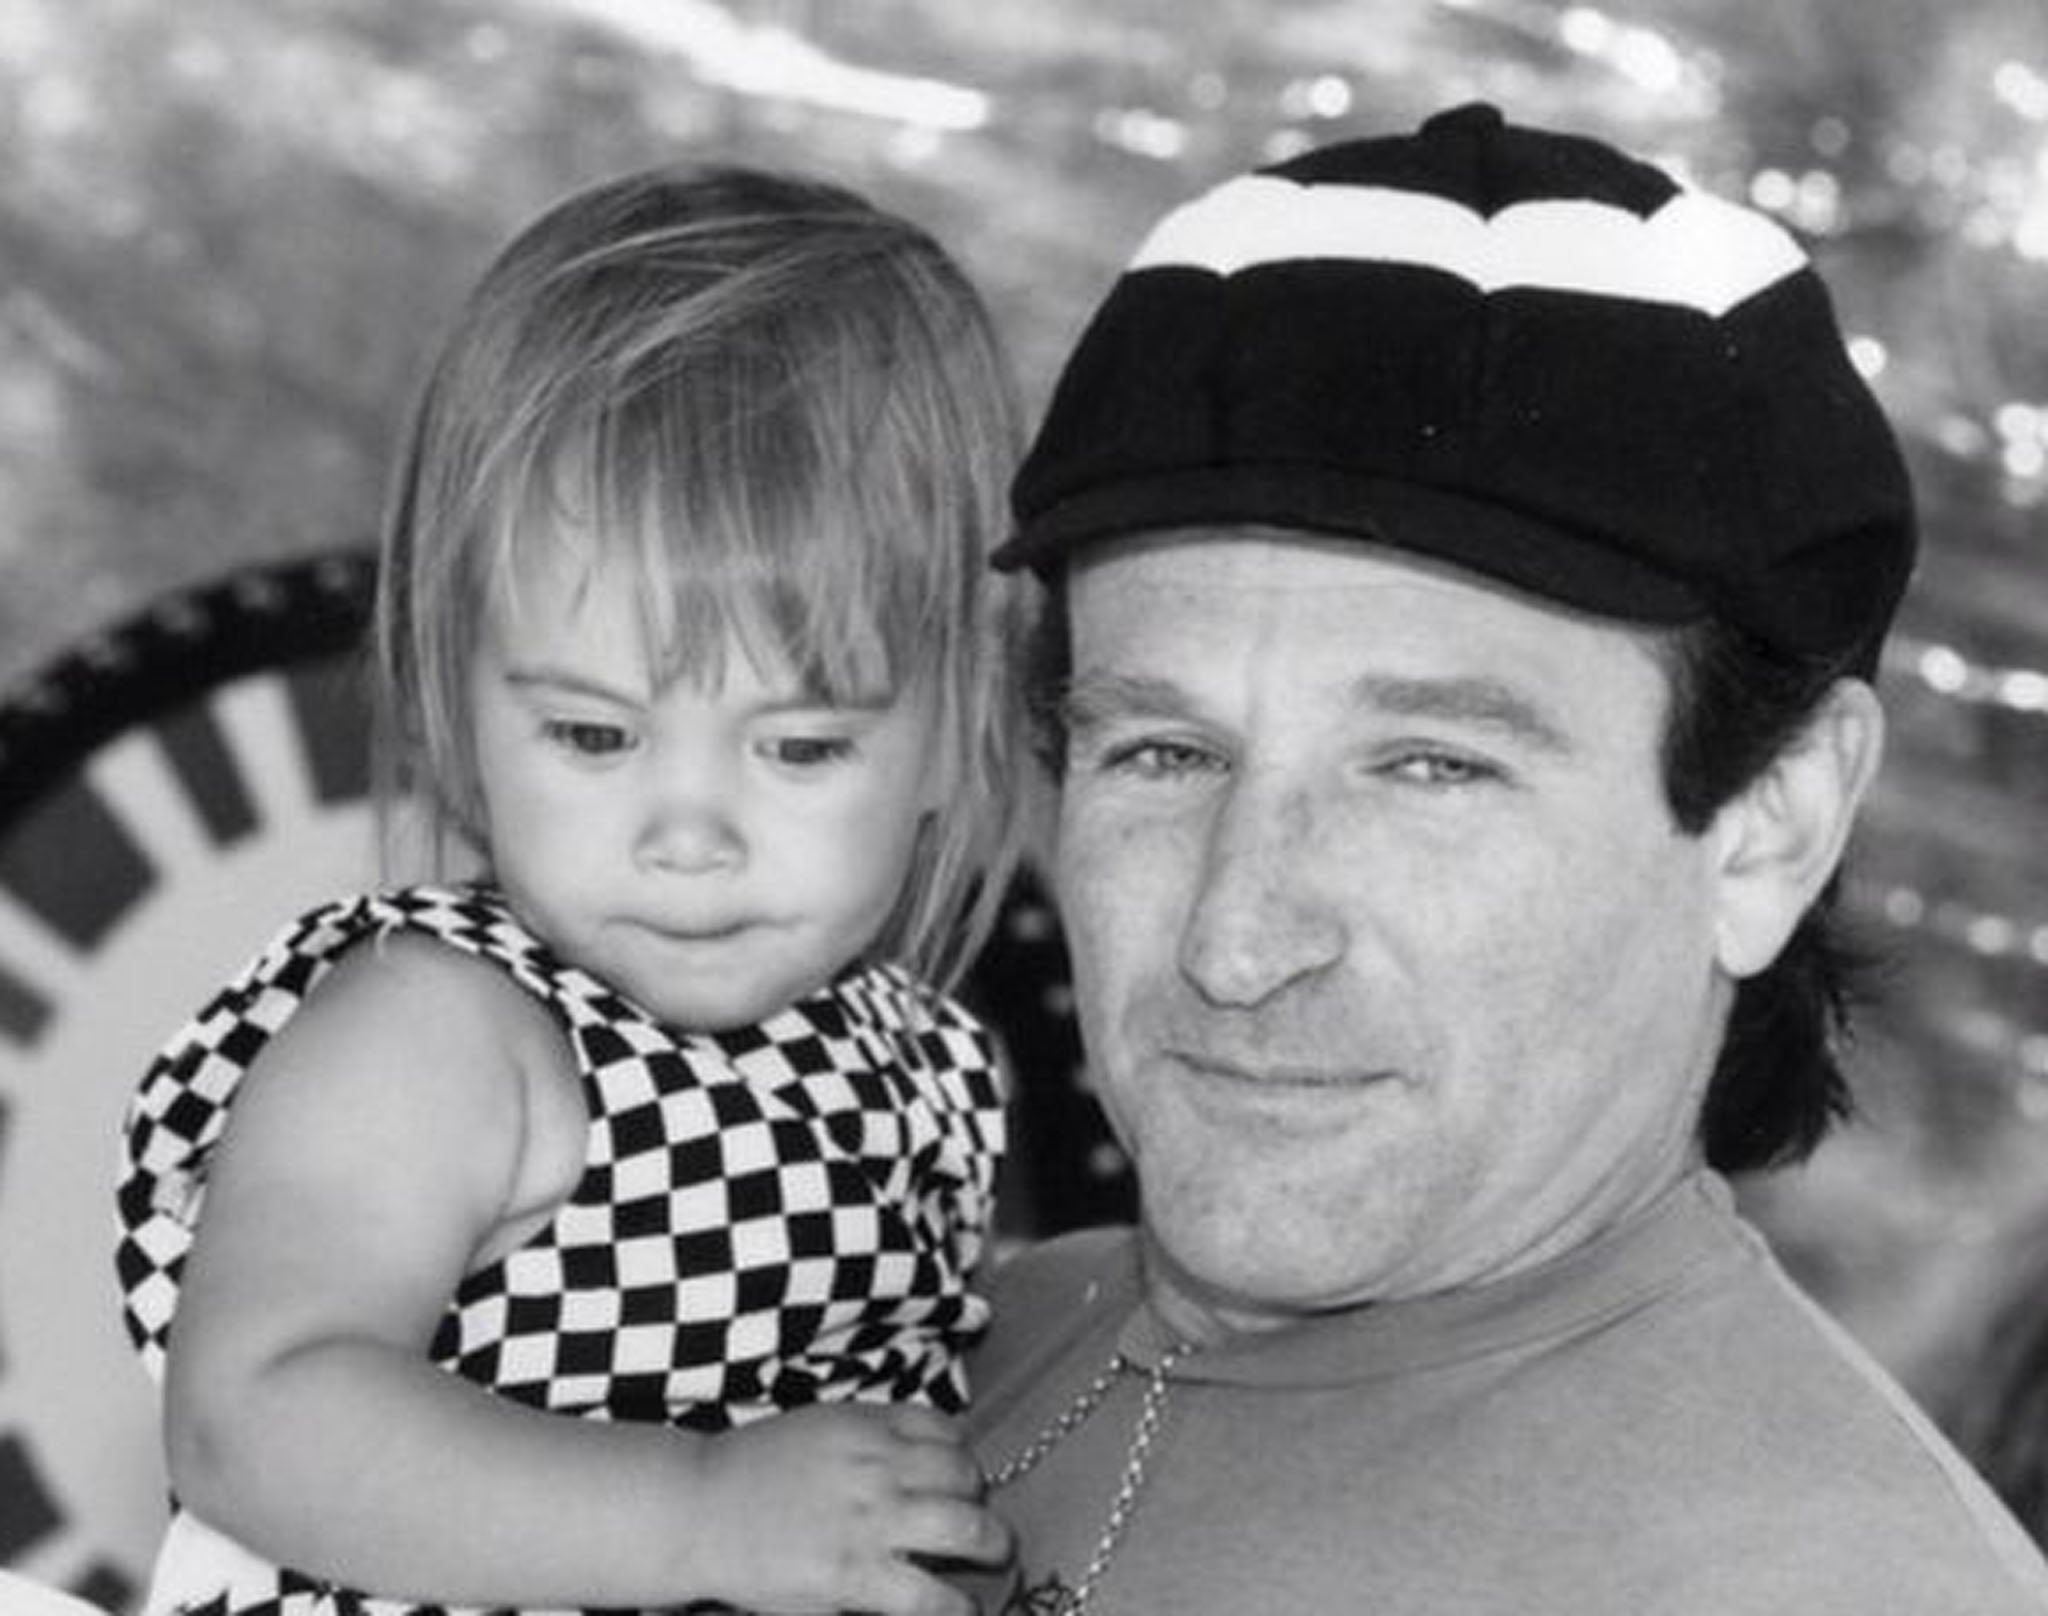 This is the last picture Robin Williams posted on Instagram on his daughter Zelda's 25th birthday